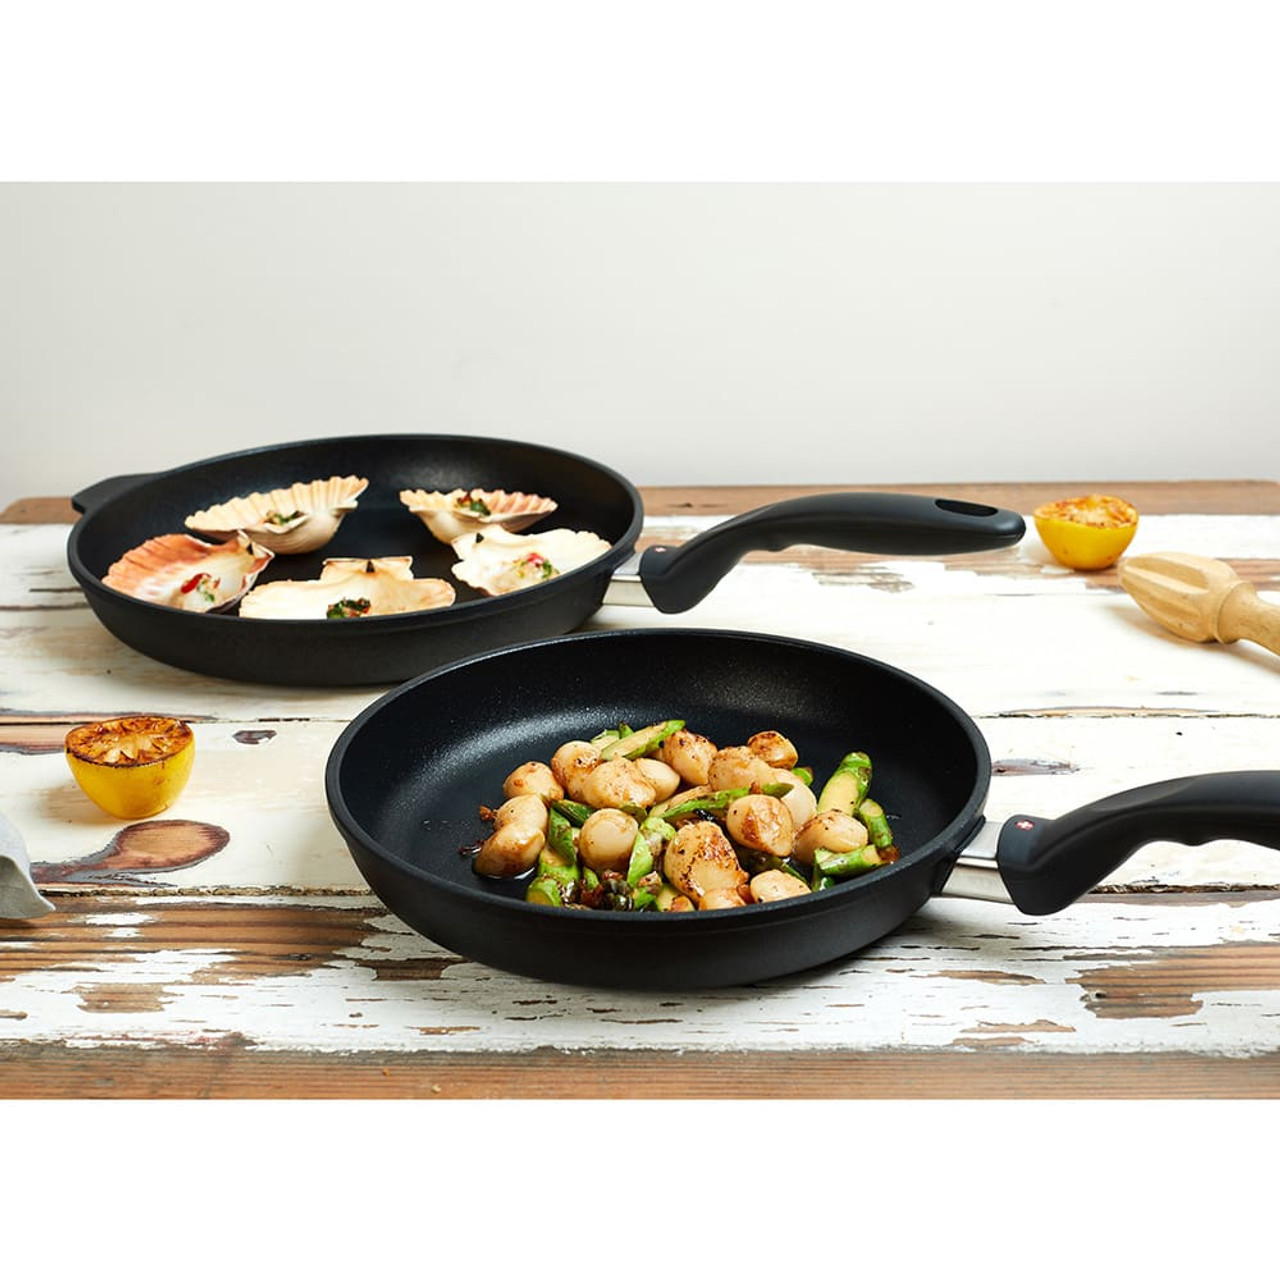 https://cdn11.bigcommerce.com/s-hccytny0od/images/stencil/1280x1280/products/3600/12850/swiss-diamond-xd-nonstick-fry-pan-set-9in-11in-1__54338.1601474558.jpg?c=2?imbypass=on